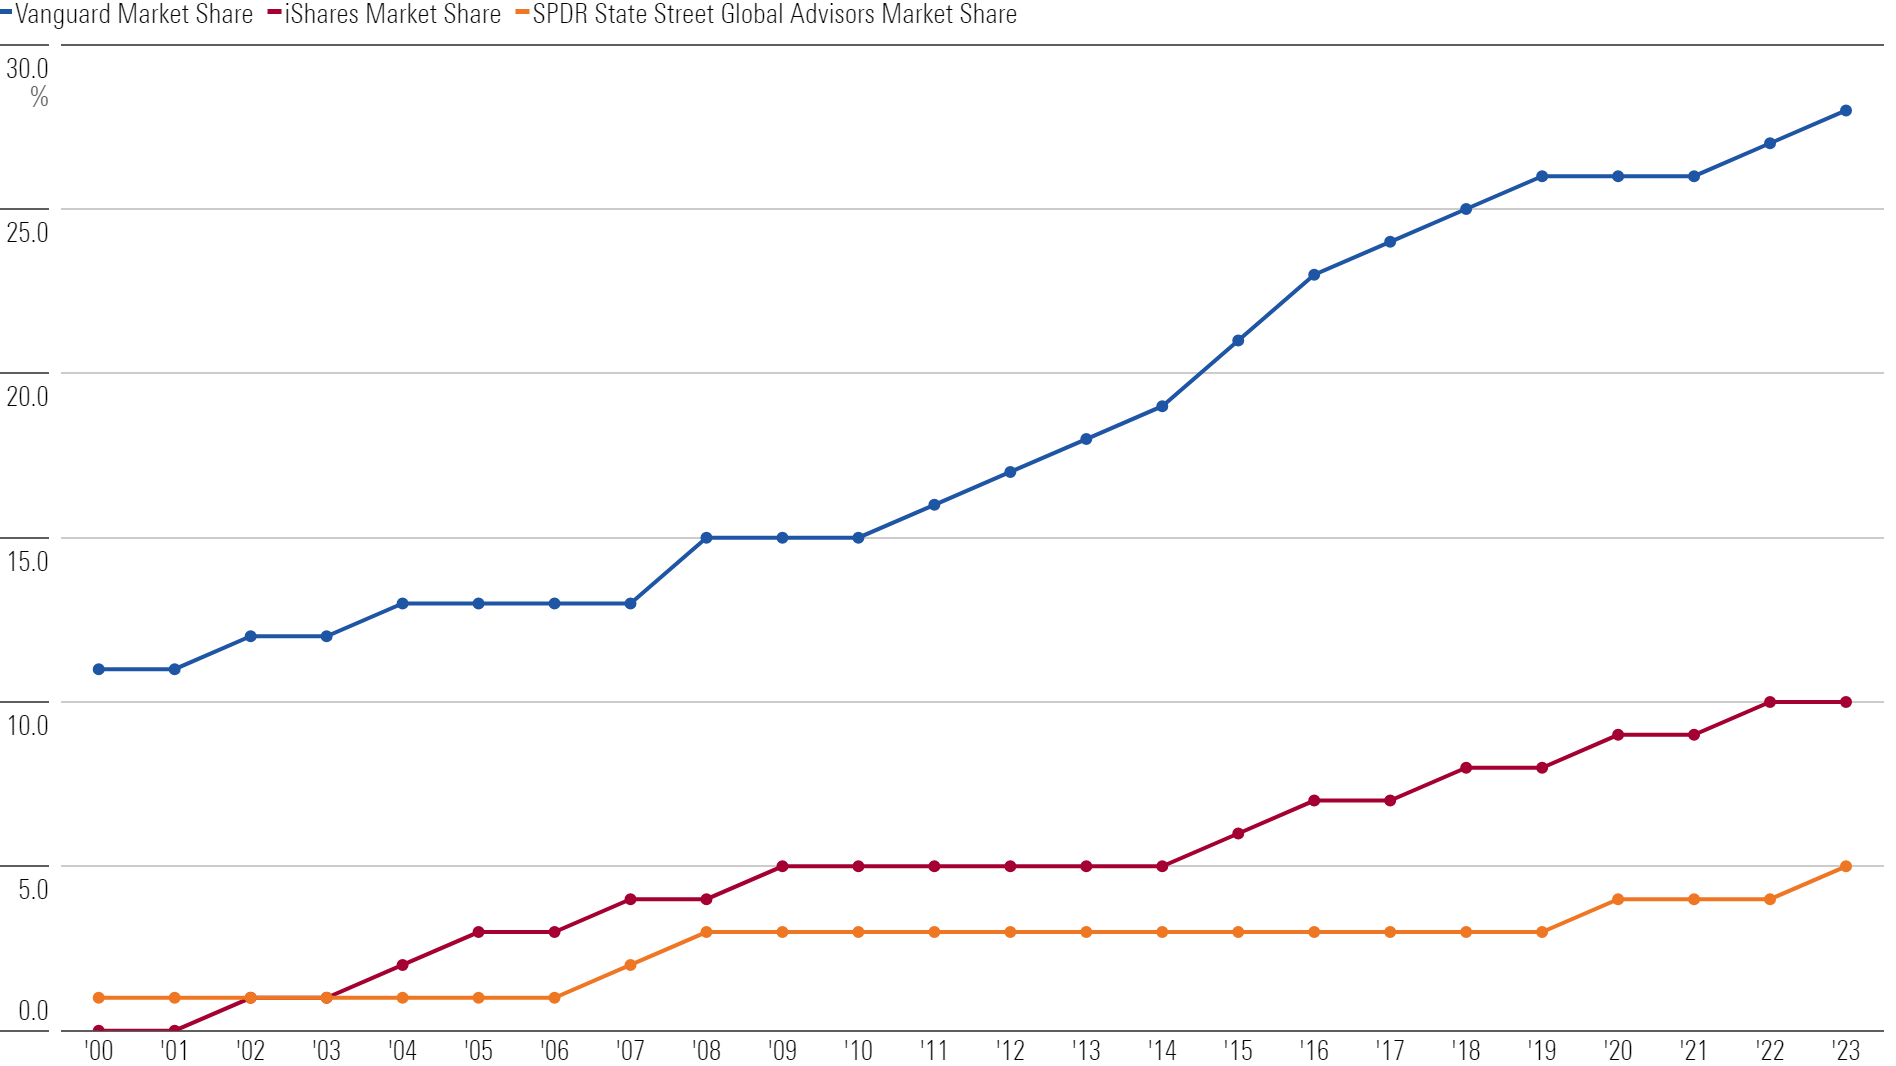 Line chart of market share of passive-driven companies Vanguard, iShares, and State Street from 2000 to 2023.